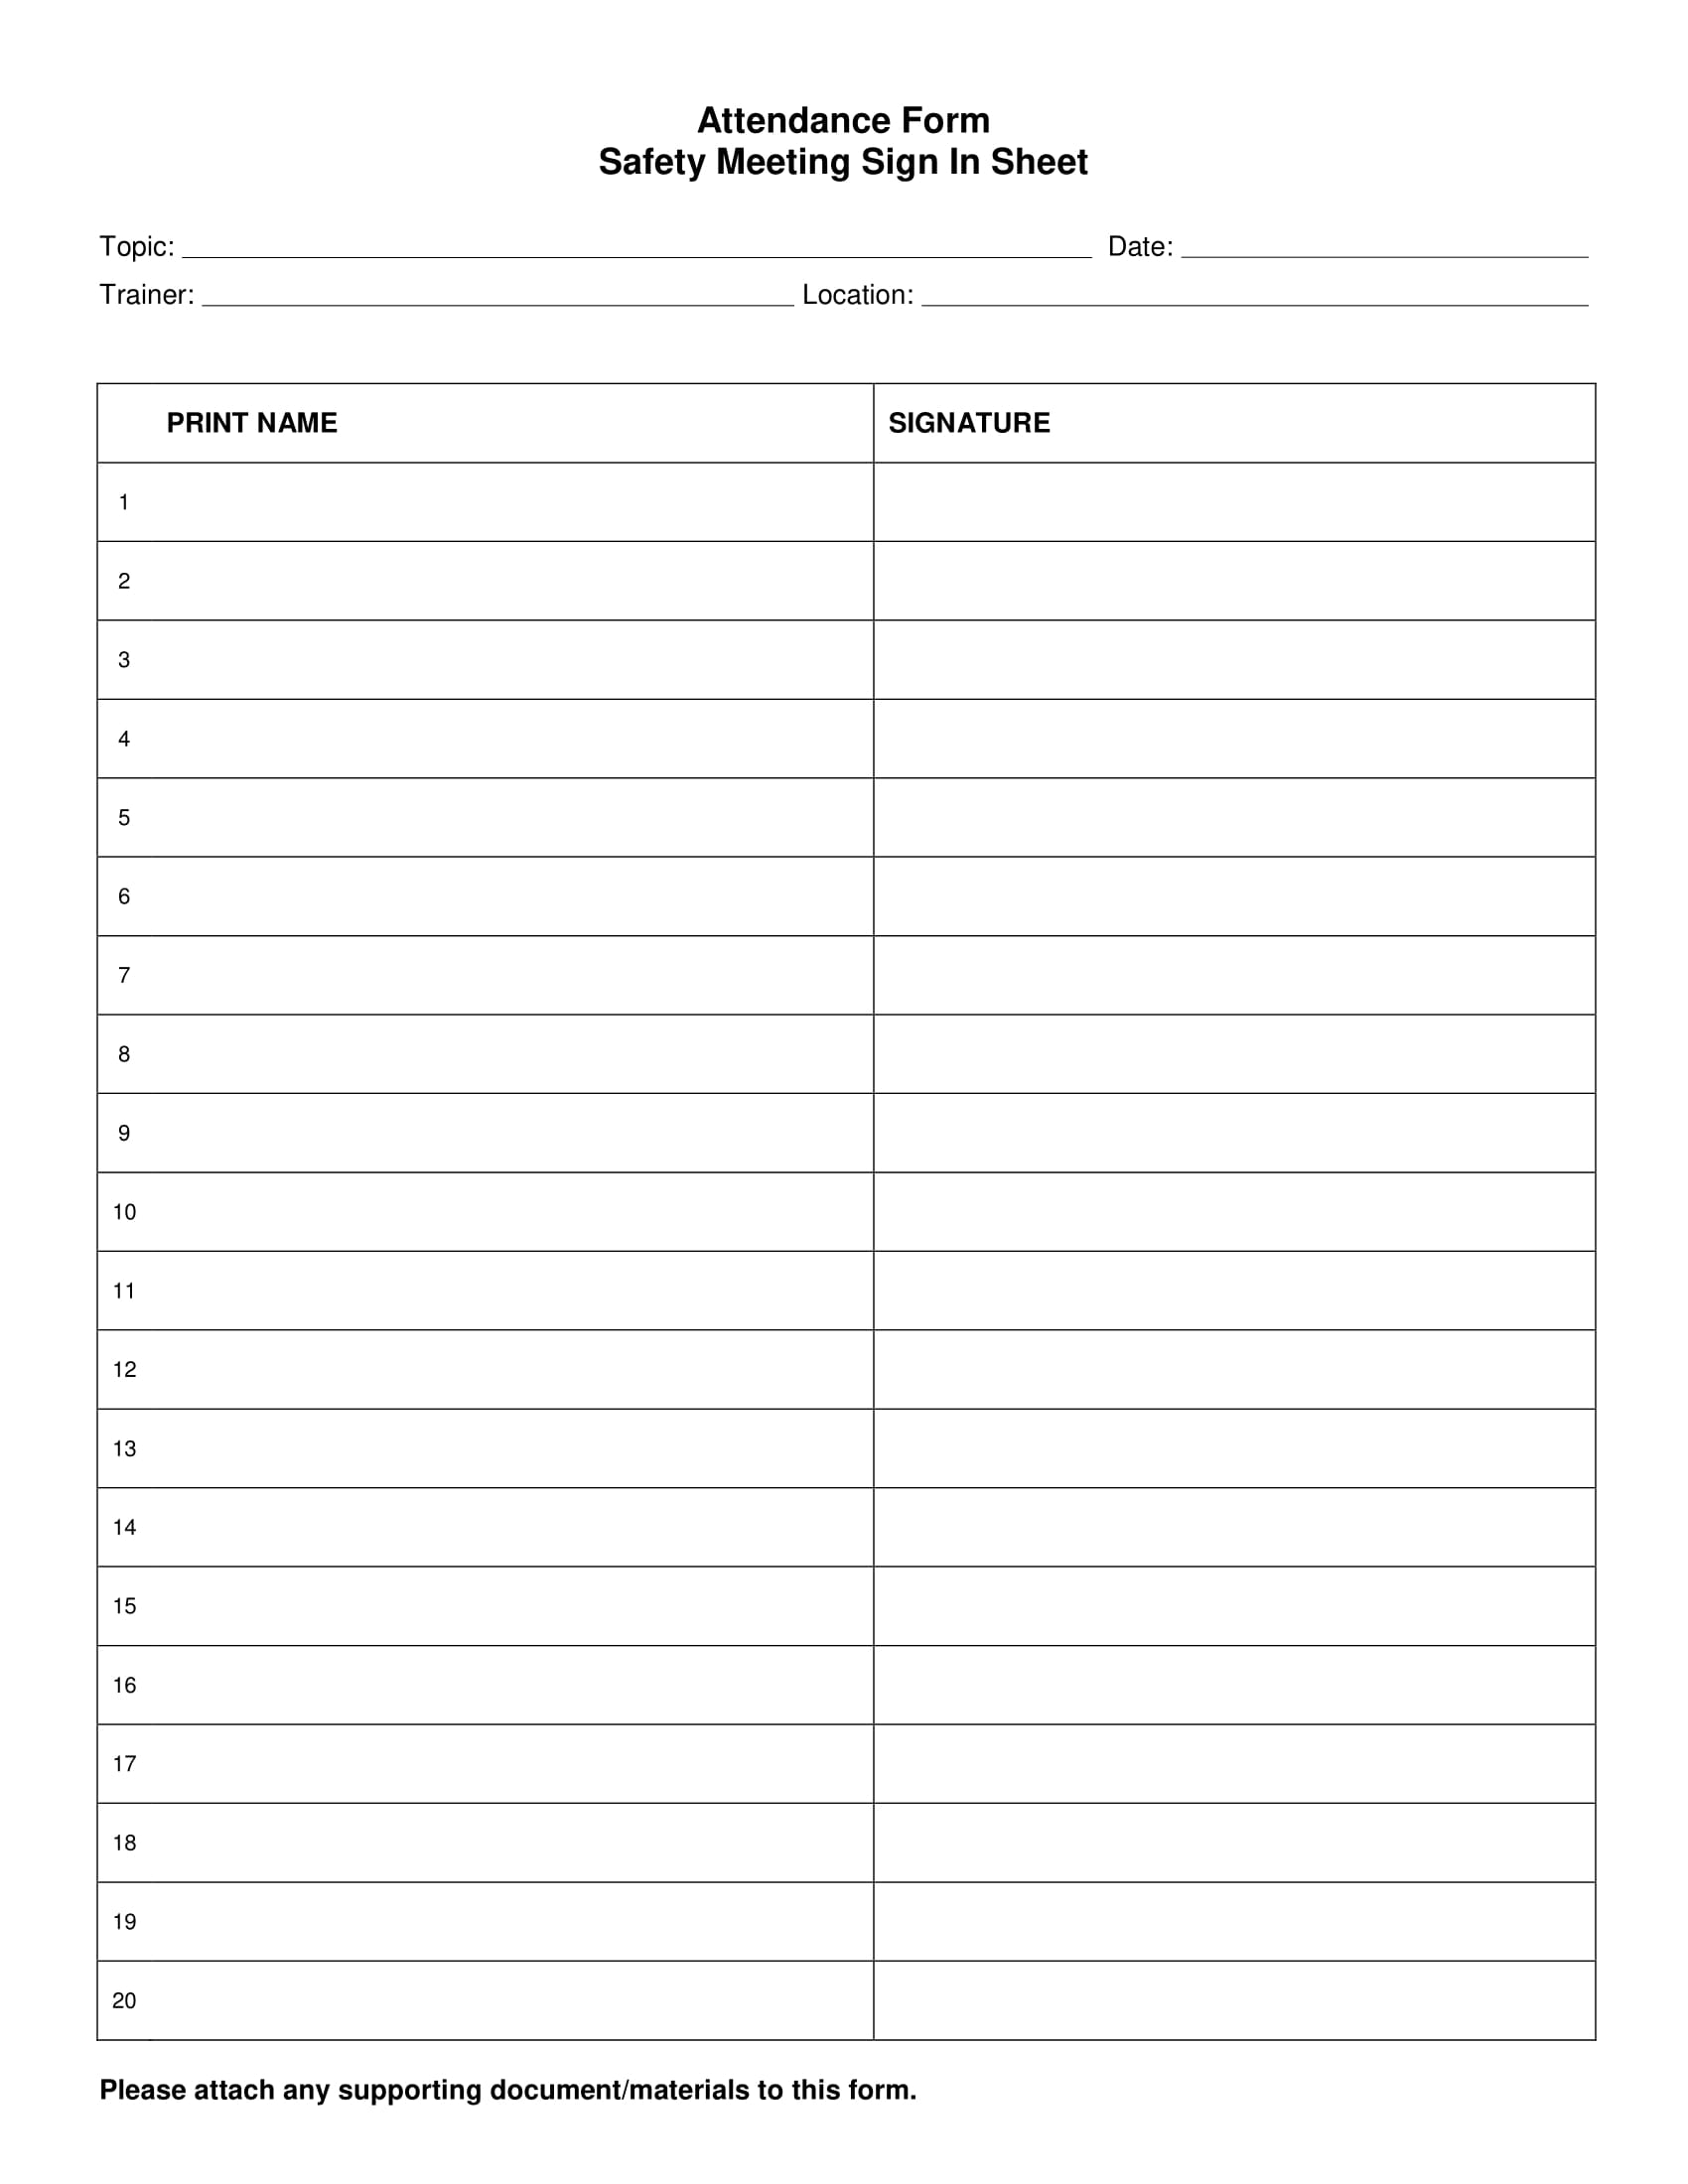 attendance form safety meeting sign in sheet 1